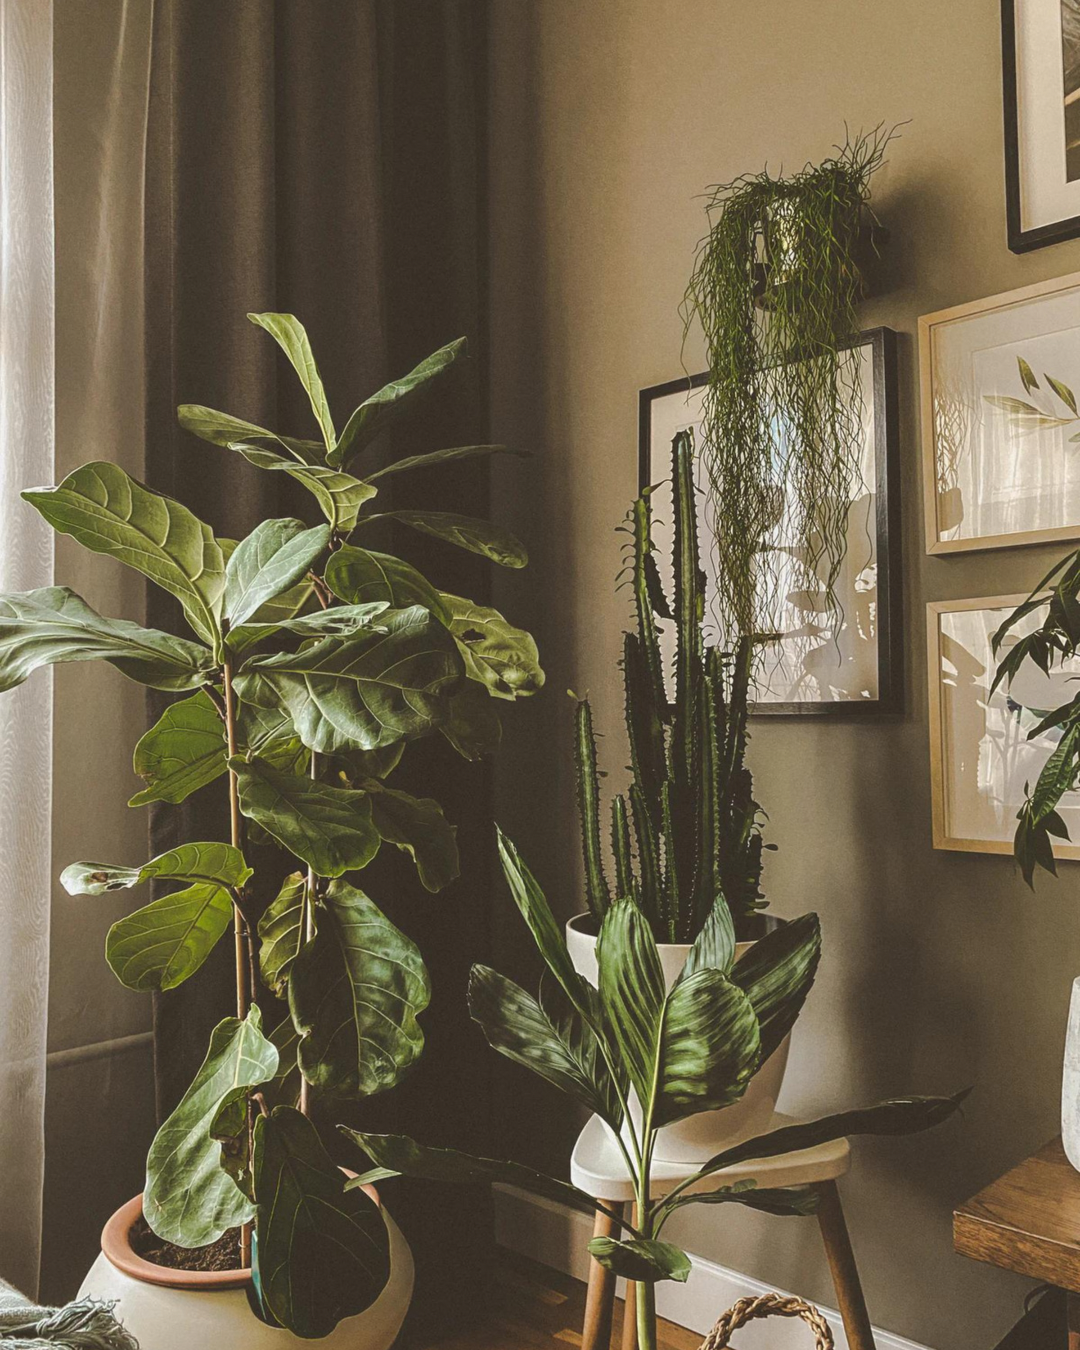 A cosy room dotted with different house plants